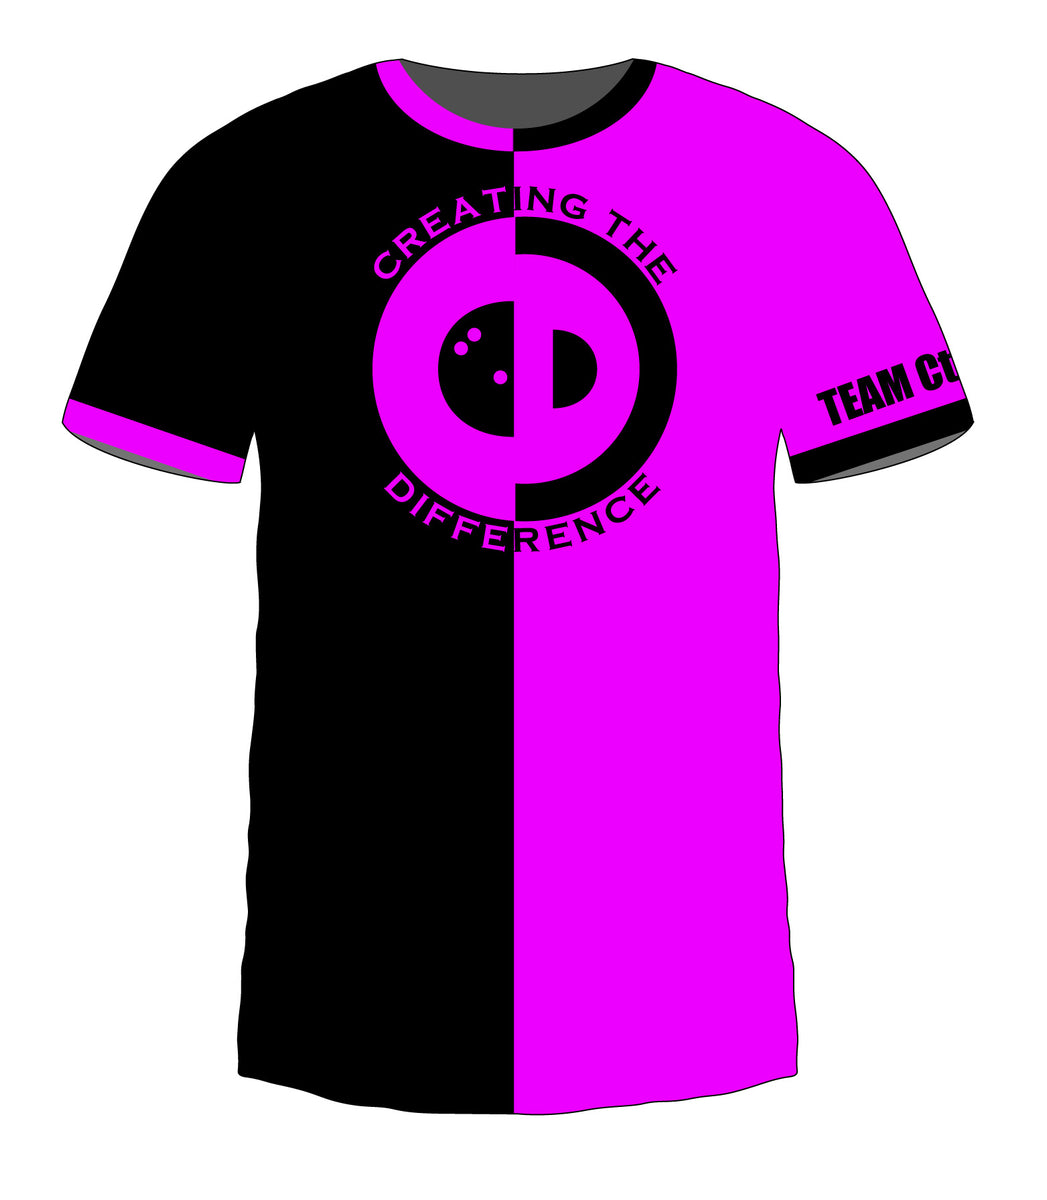 Bowling Shirts Difference Split Jersey the Creating Pink | 